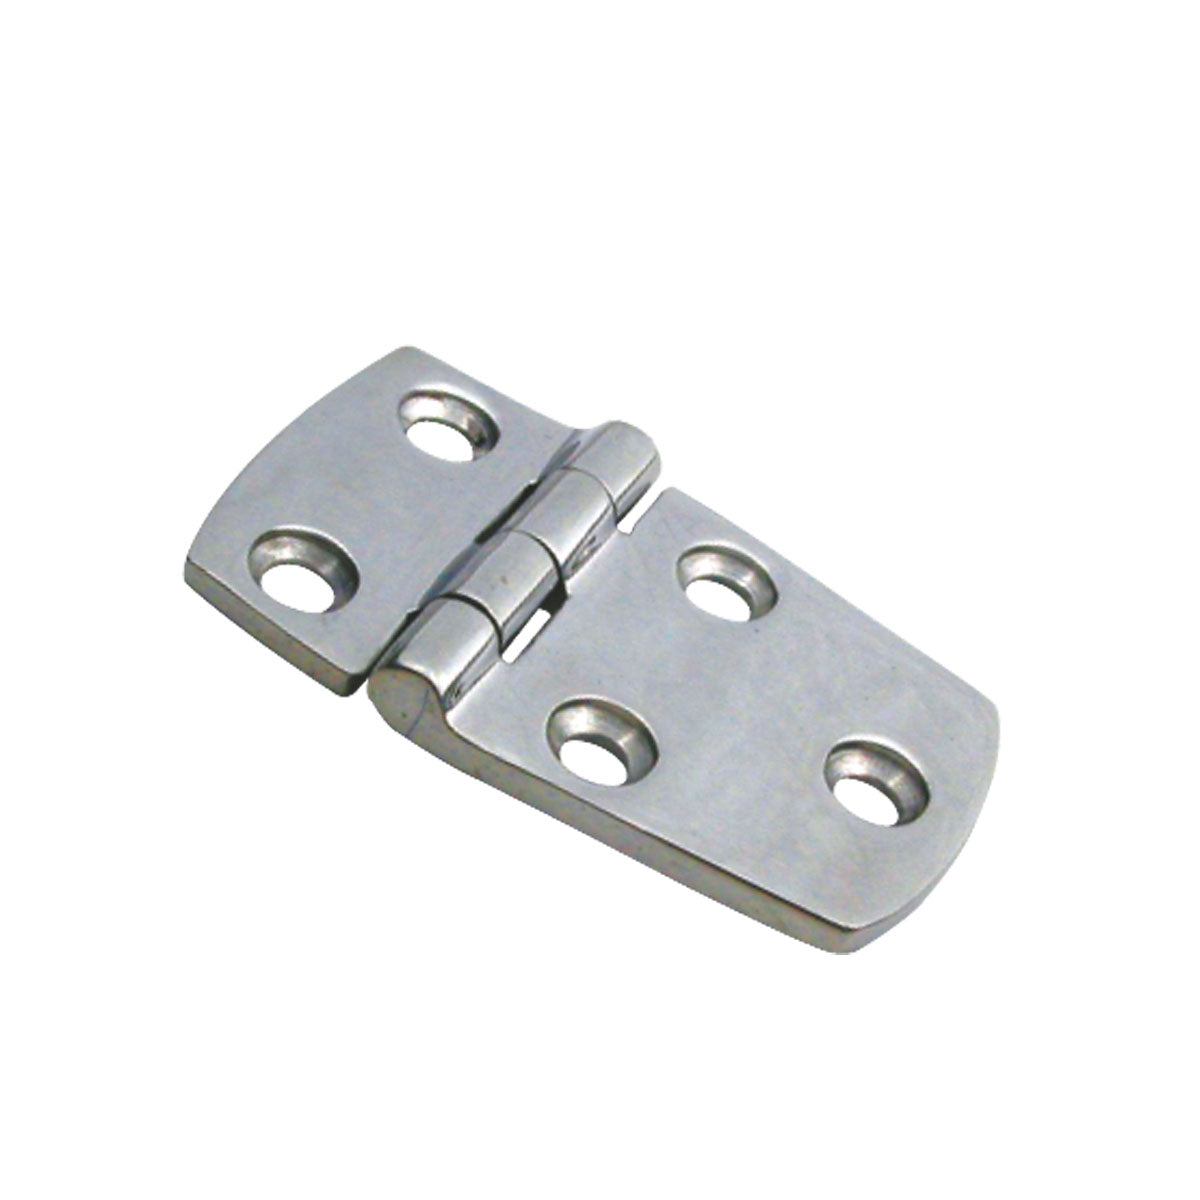 Marine Town® Hinges – Cast 316 Grade Stainless Steel